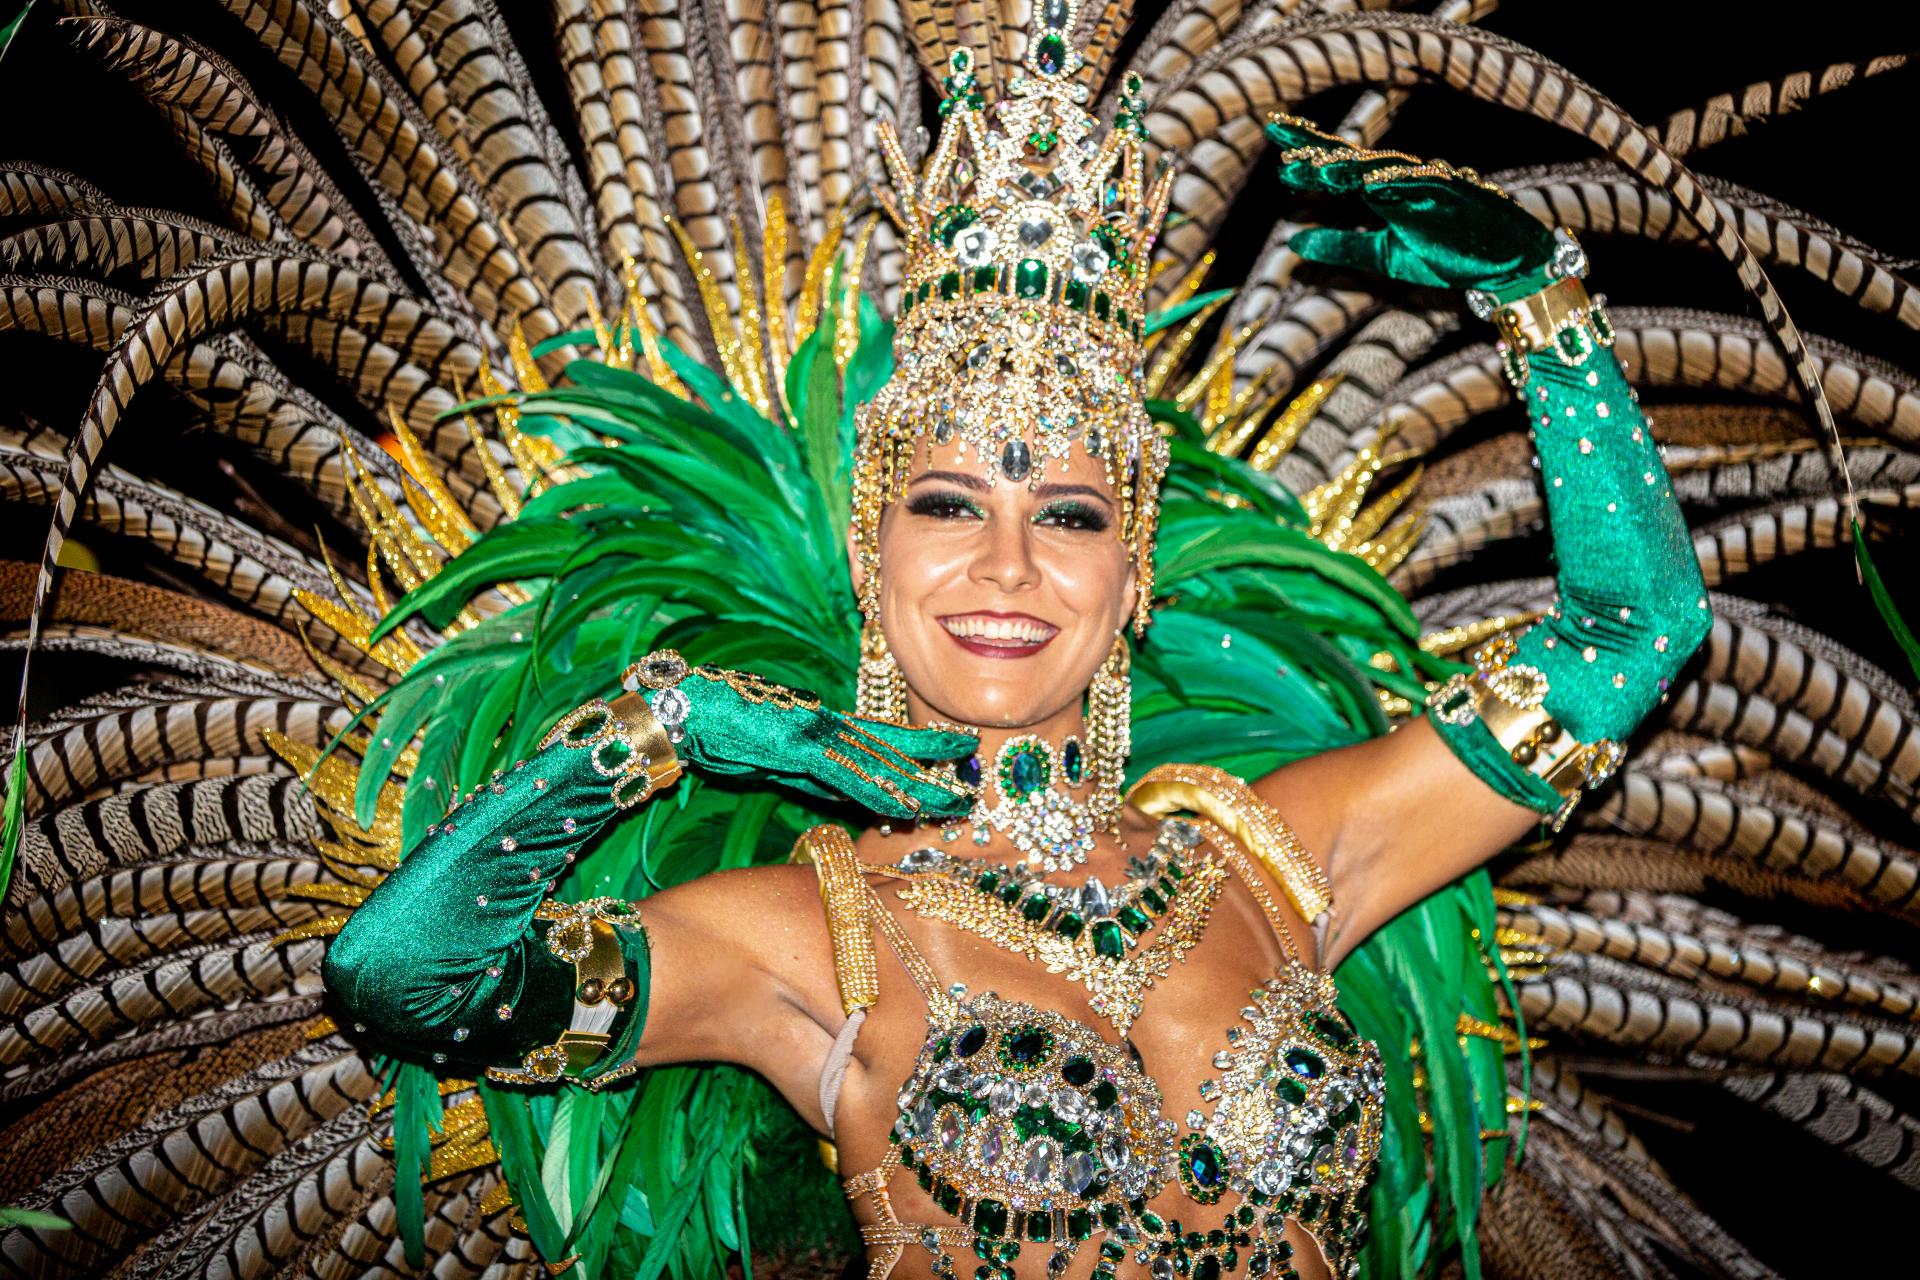 Brazilian costumes: colorful and lively | Aventura do Brasil